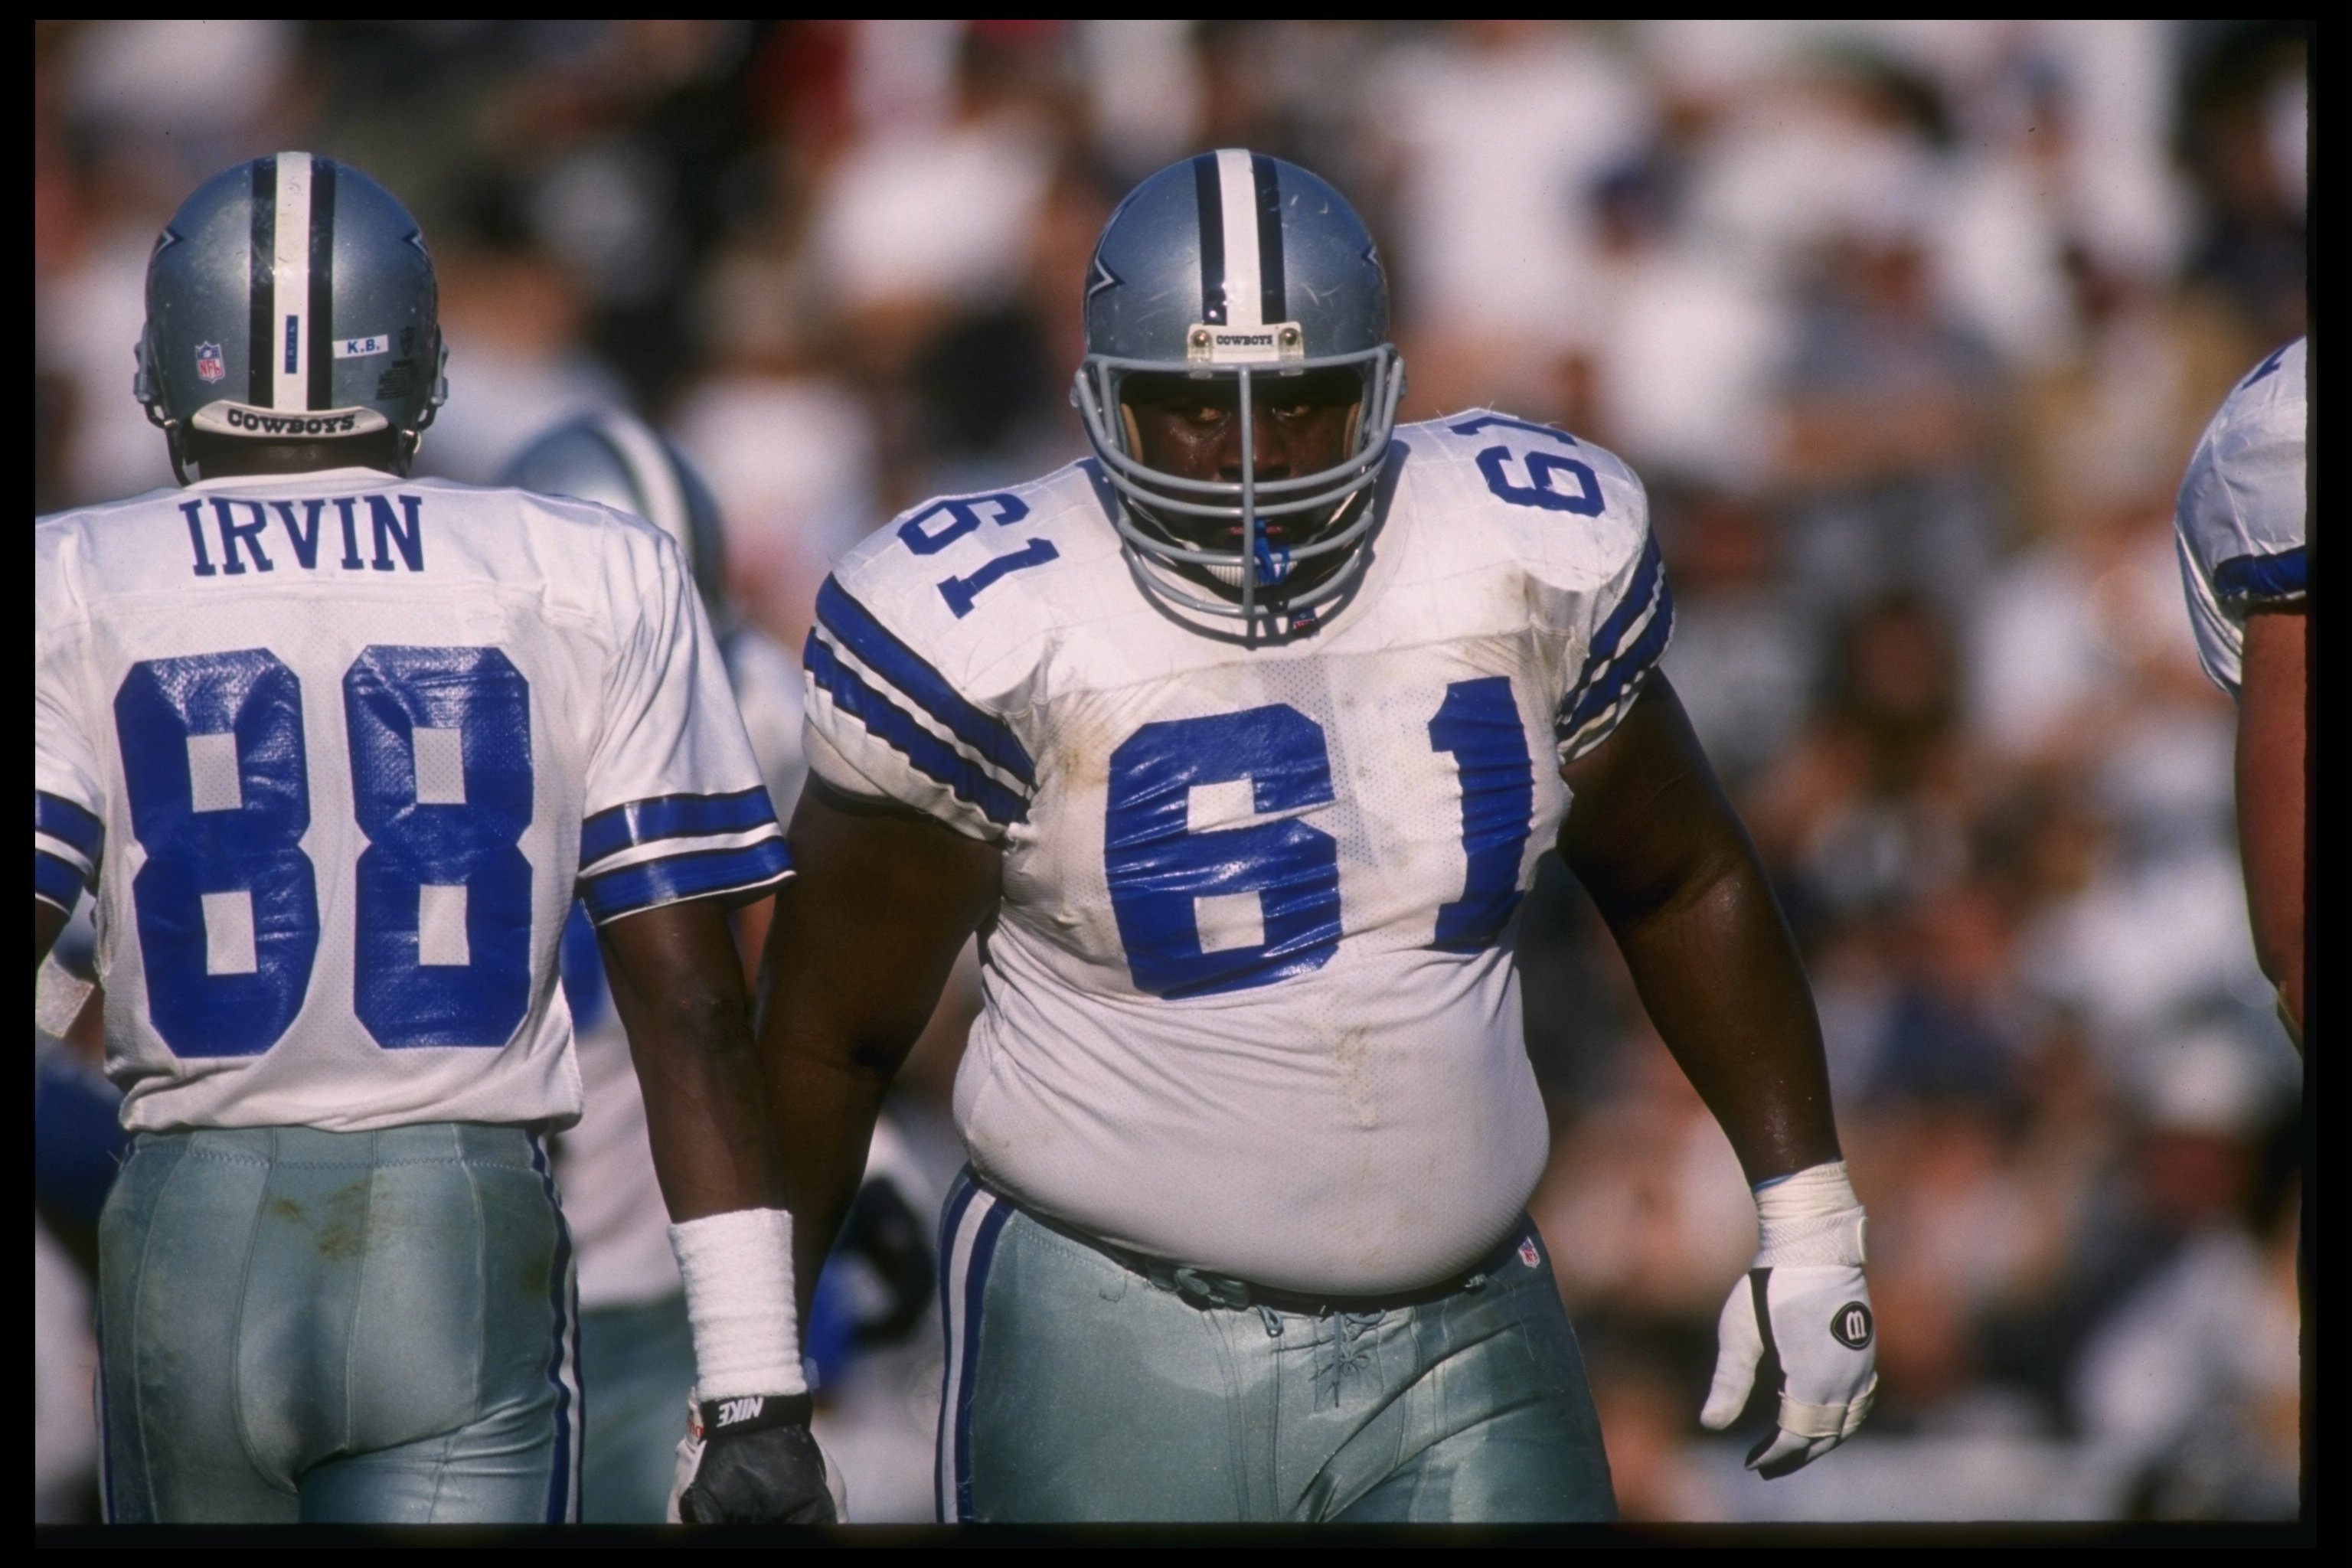 19 Nov 1995: Dallas Cowboys wide receiver Michael Irvin and offensive lineman Nate Newton look on during a game against the Oakland Raiders at Oakland Stadium in Oakland, California. The Cowboys won the game, 34-21.